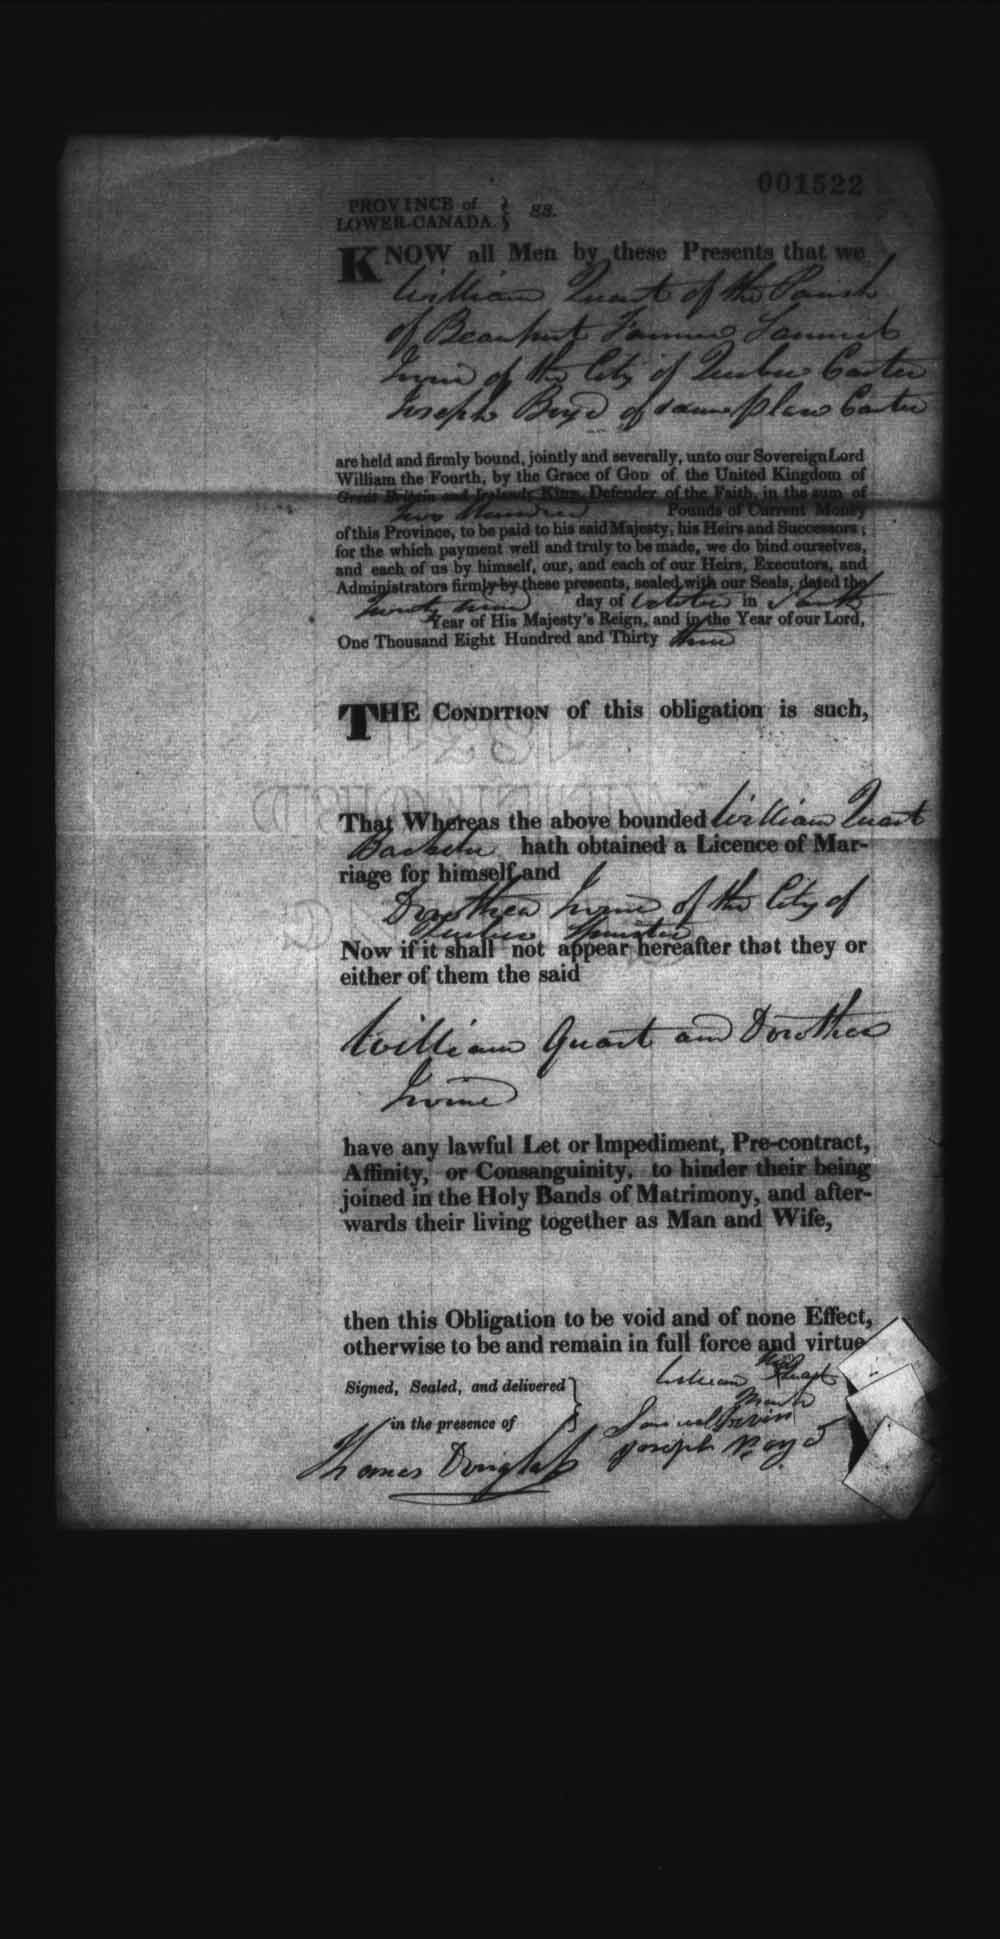 Digitized page of Upper and Lower Canada Marriage Bonds (1779-1865) for Image No.: e008237818